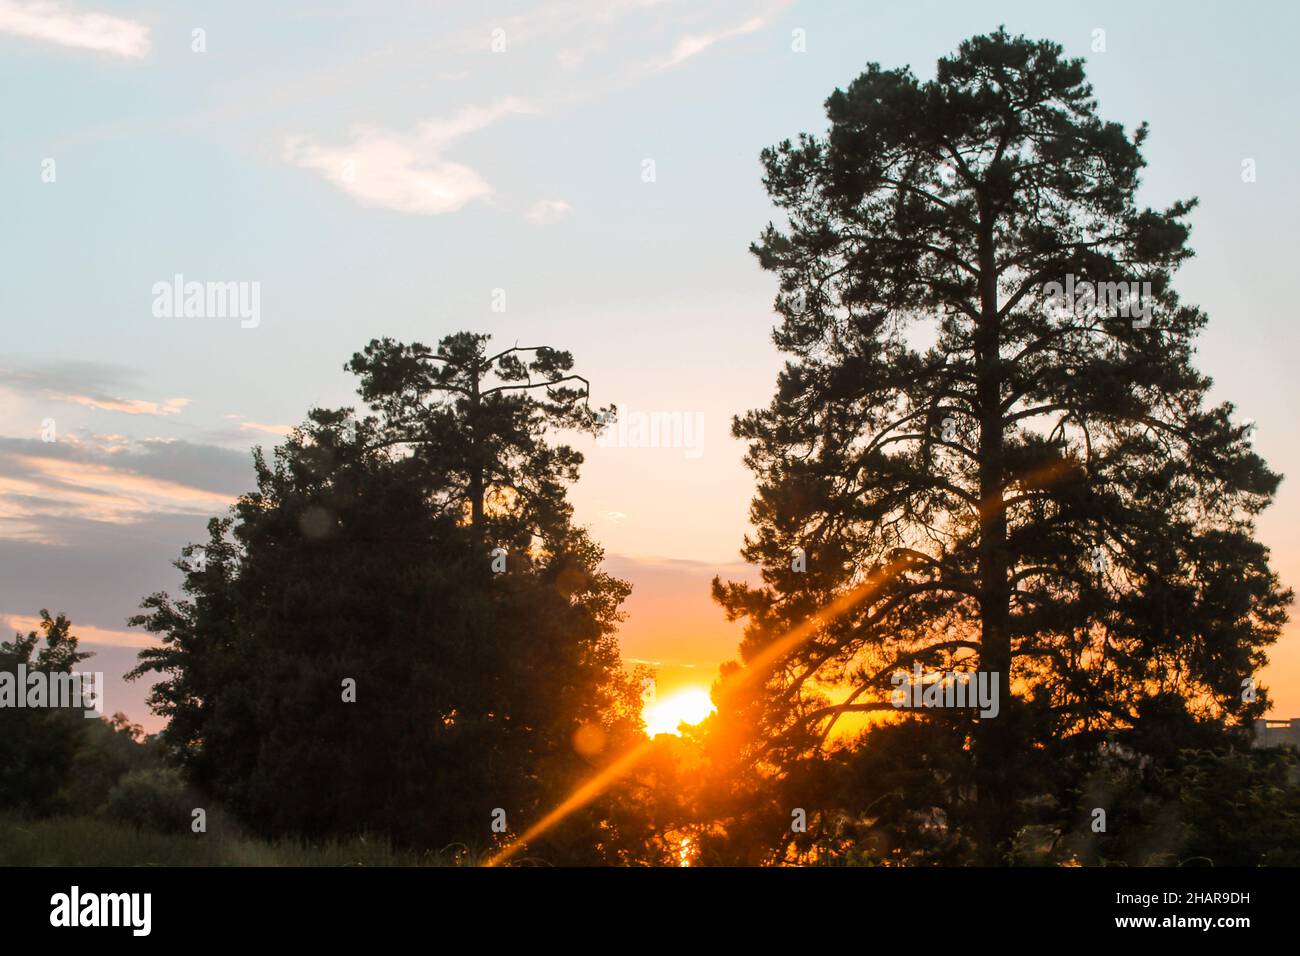 Sun is setting behind tall trees. Silhouettes of pine trees against sunset sky. Stock Photo